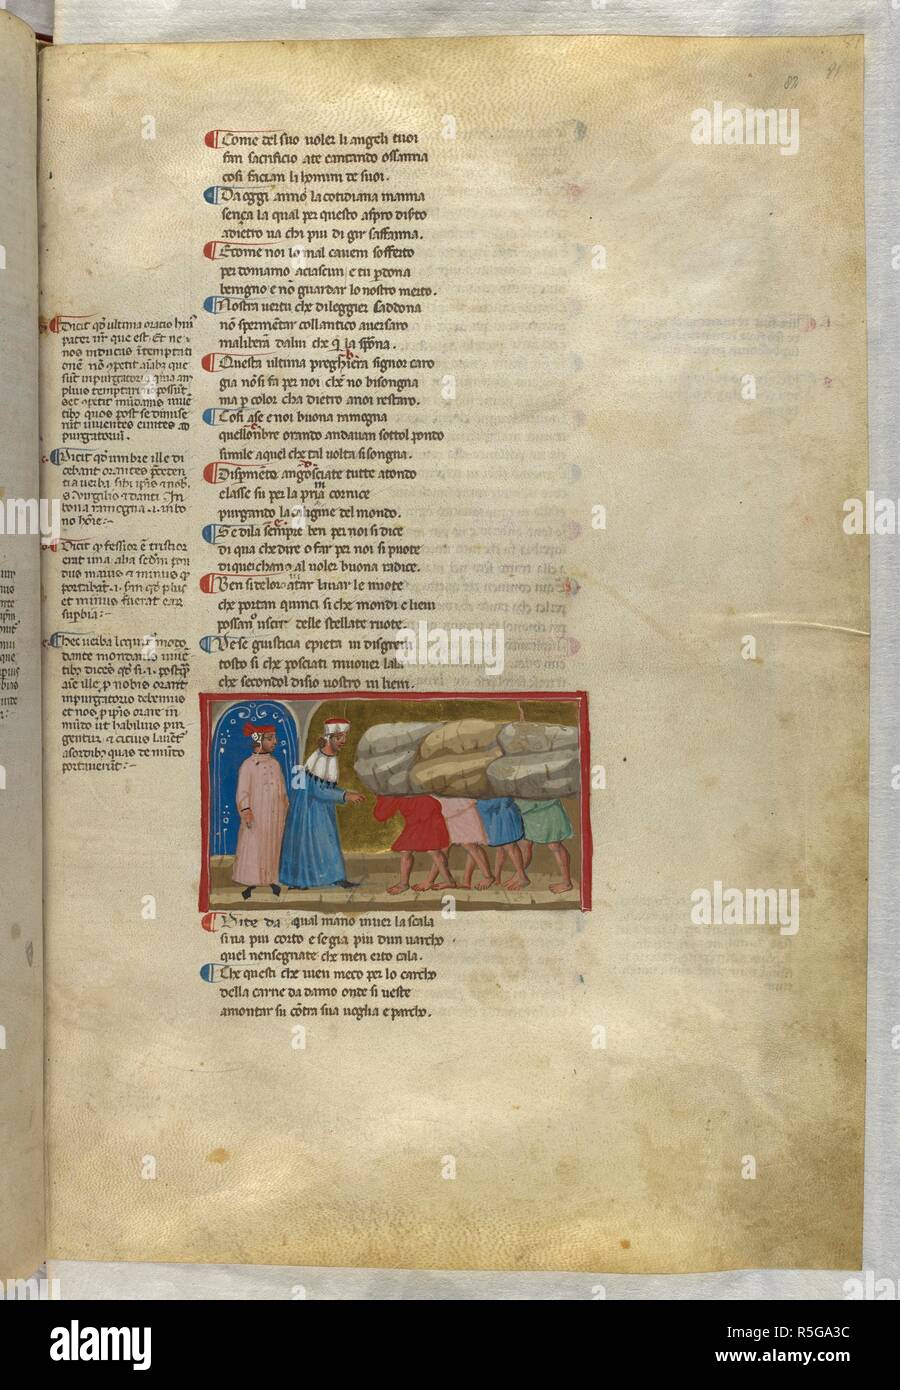 Purgatorio: Virgil speaks to the souls of the proud. Dante Alighieri, Divina Commedia ( The Divine Comedy ), with a commentary in Latin. 1st half of the 14th century. Source: Egerton 943, f.82. Language: Italian, Latin. Stock Photo